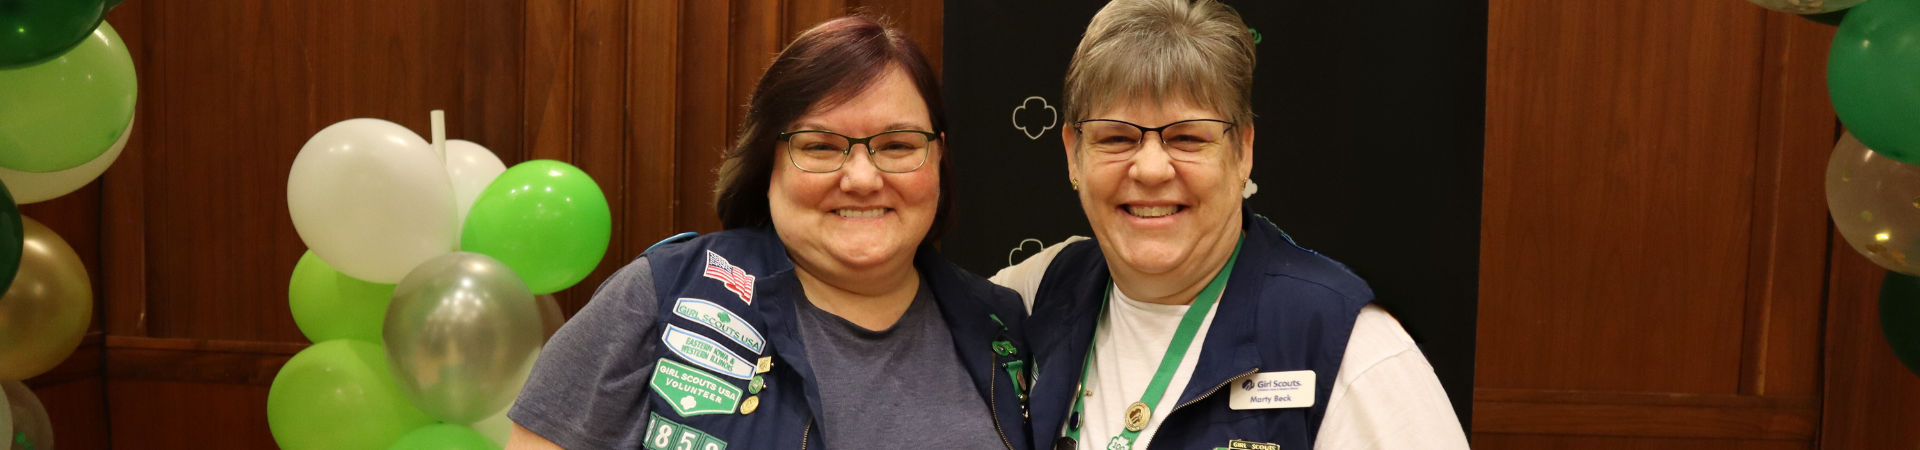  Two adult volunteers in official Girl Scout gear smiling together 